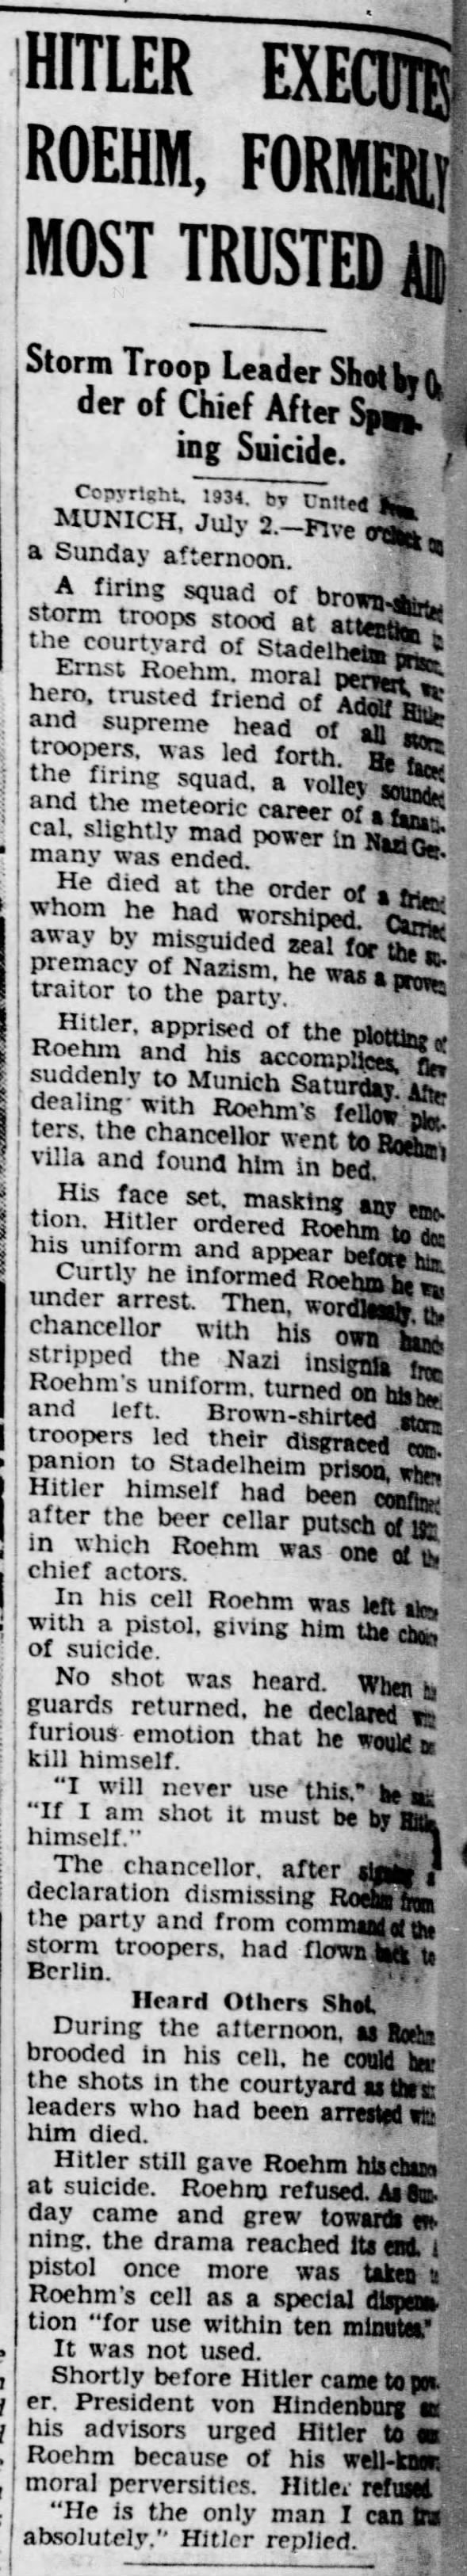 Hitler Executes Roehm, Formerly Most Trusted Aide